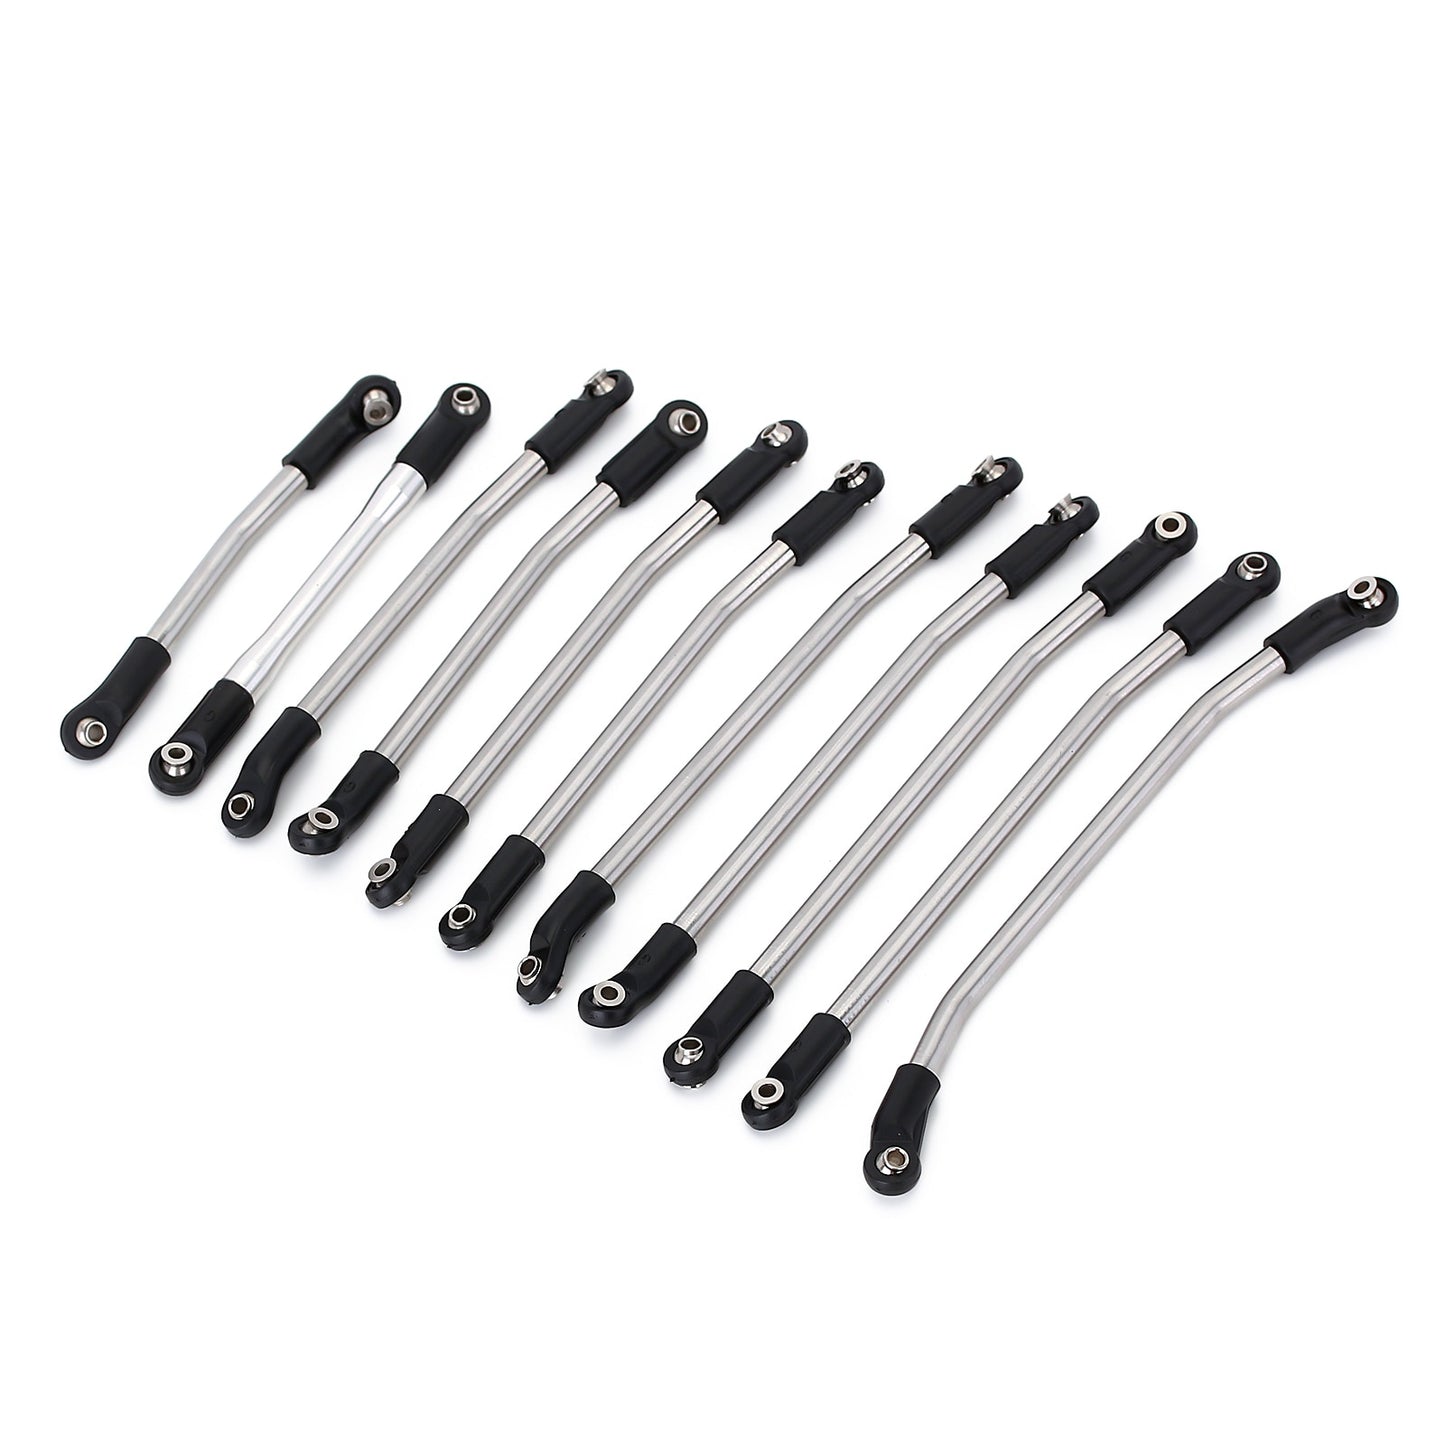 INJORA 11Pcs 313mm Wheelbase Metal Chassis Links Rod End Set for 1/10 RC Crawler Car Axial SCX10 II 90046 Upgrade Parts